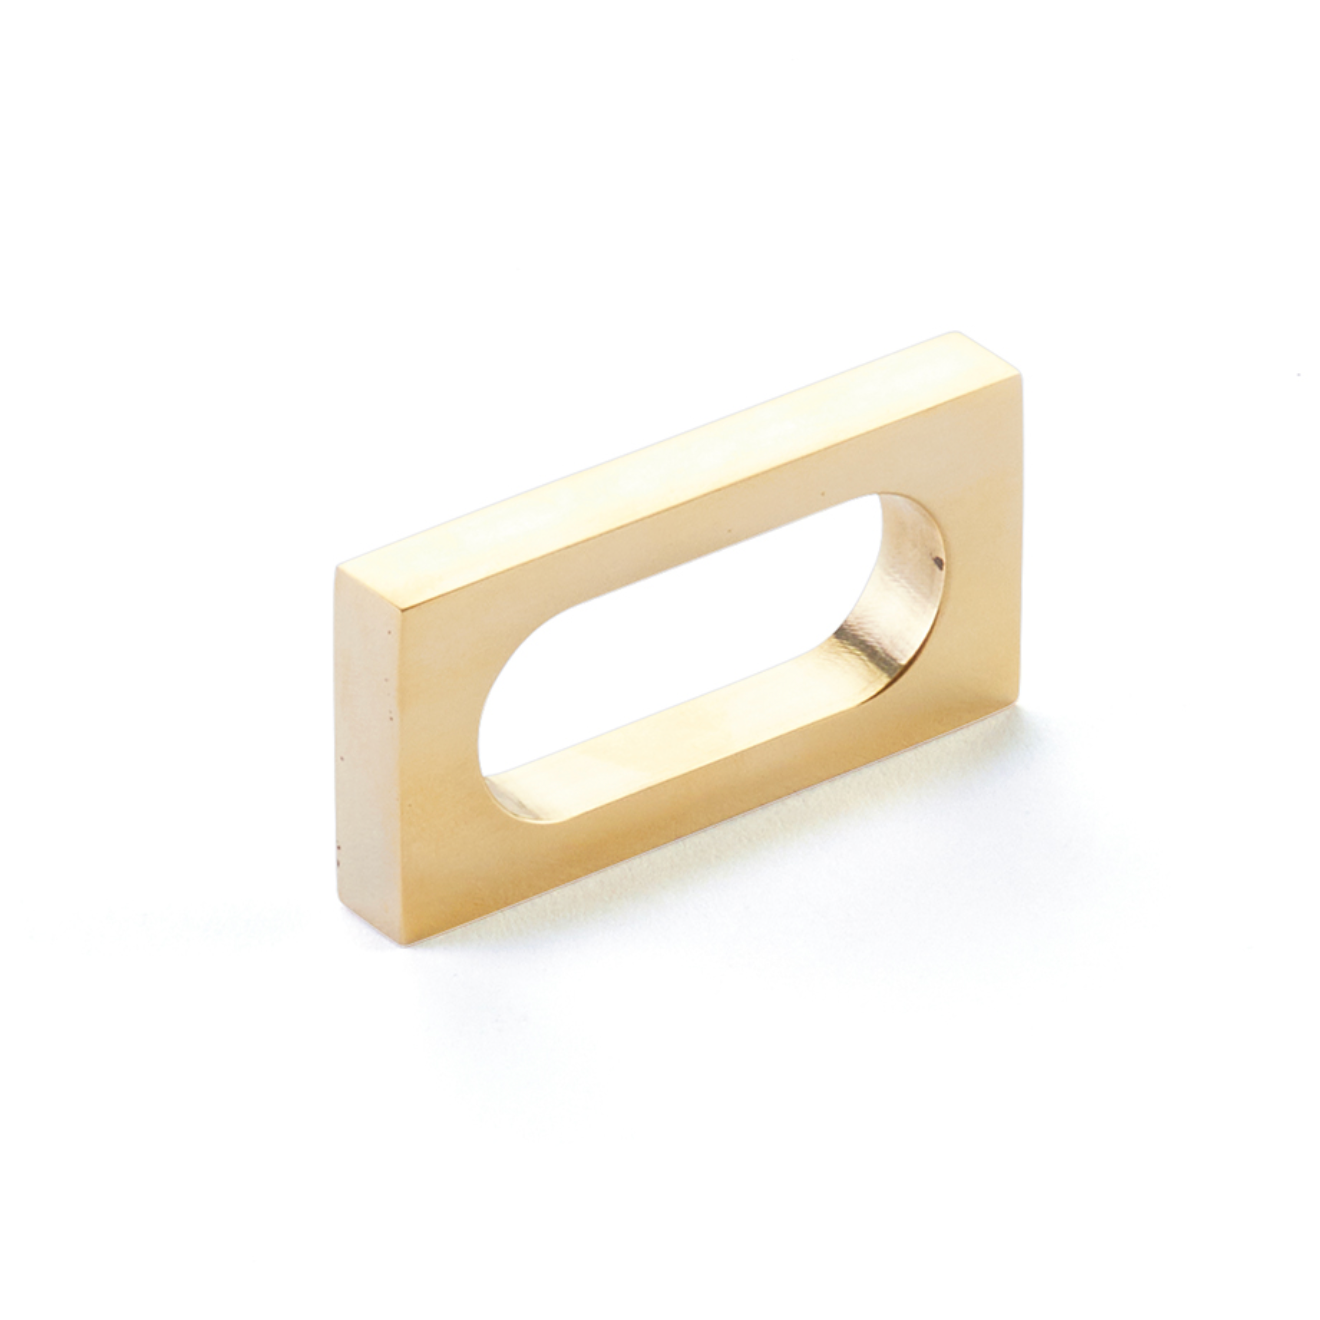 Satin Brass "Loop" Square Drawer Pulls and Cabinet Knobs - Forge Hardware Studio